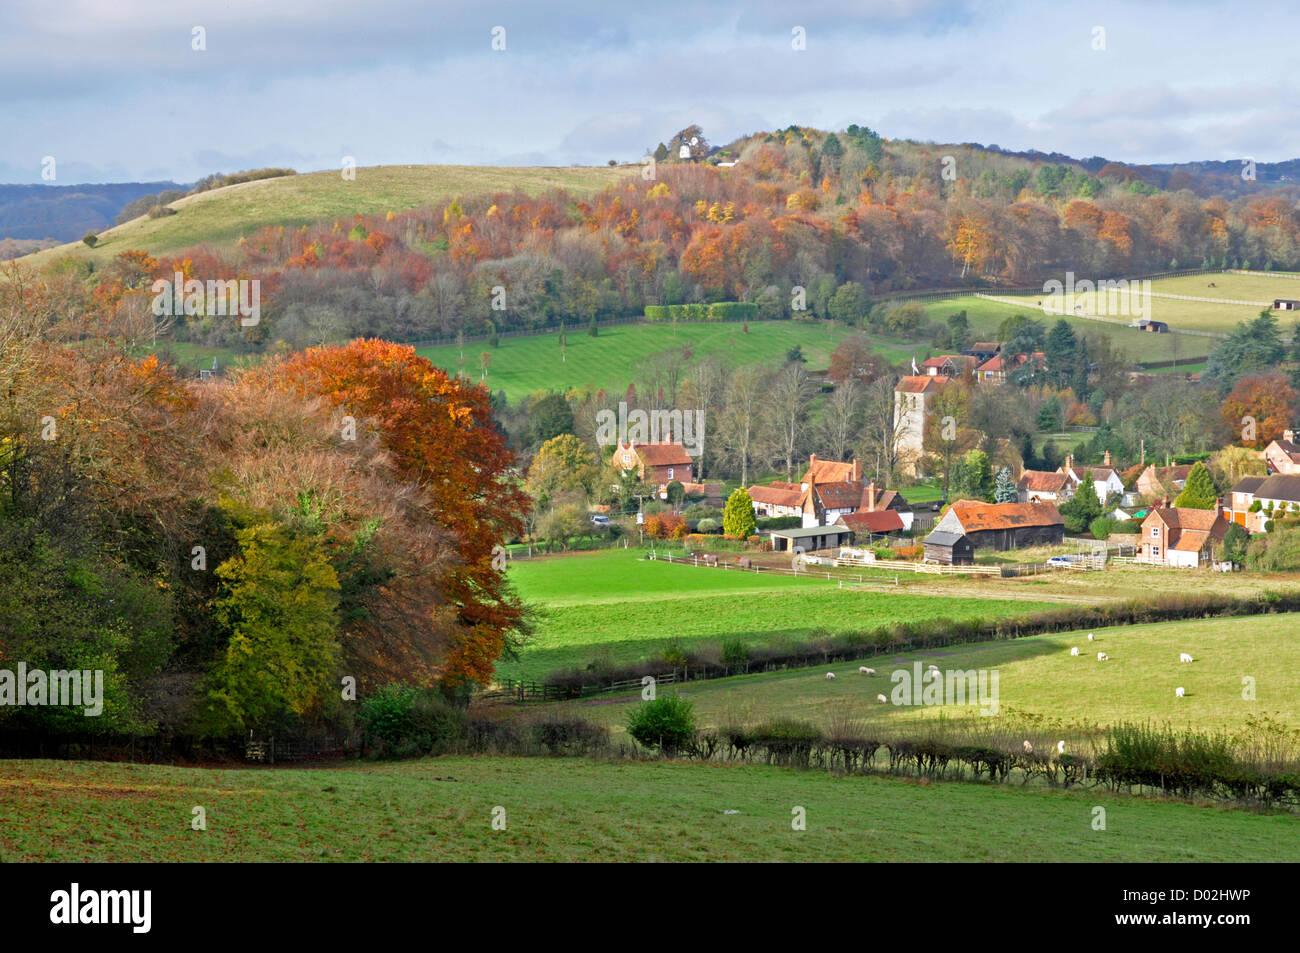 Bucks - Chiltern Hills - view over fields  to Fingest hamlet - sheltered by wooded hillsides - autumn sunlight and colours Stock Photo